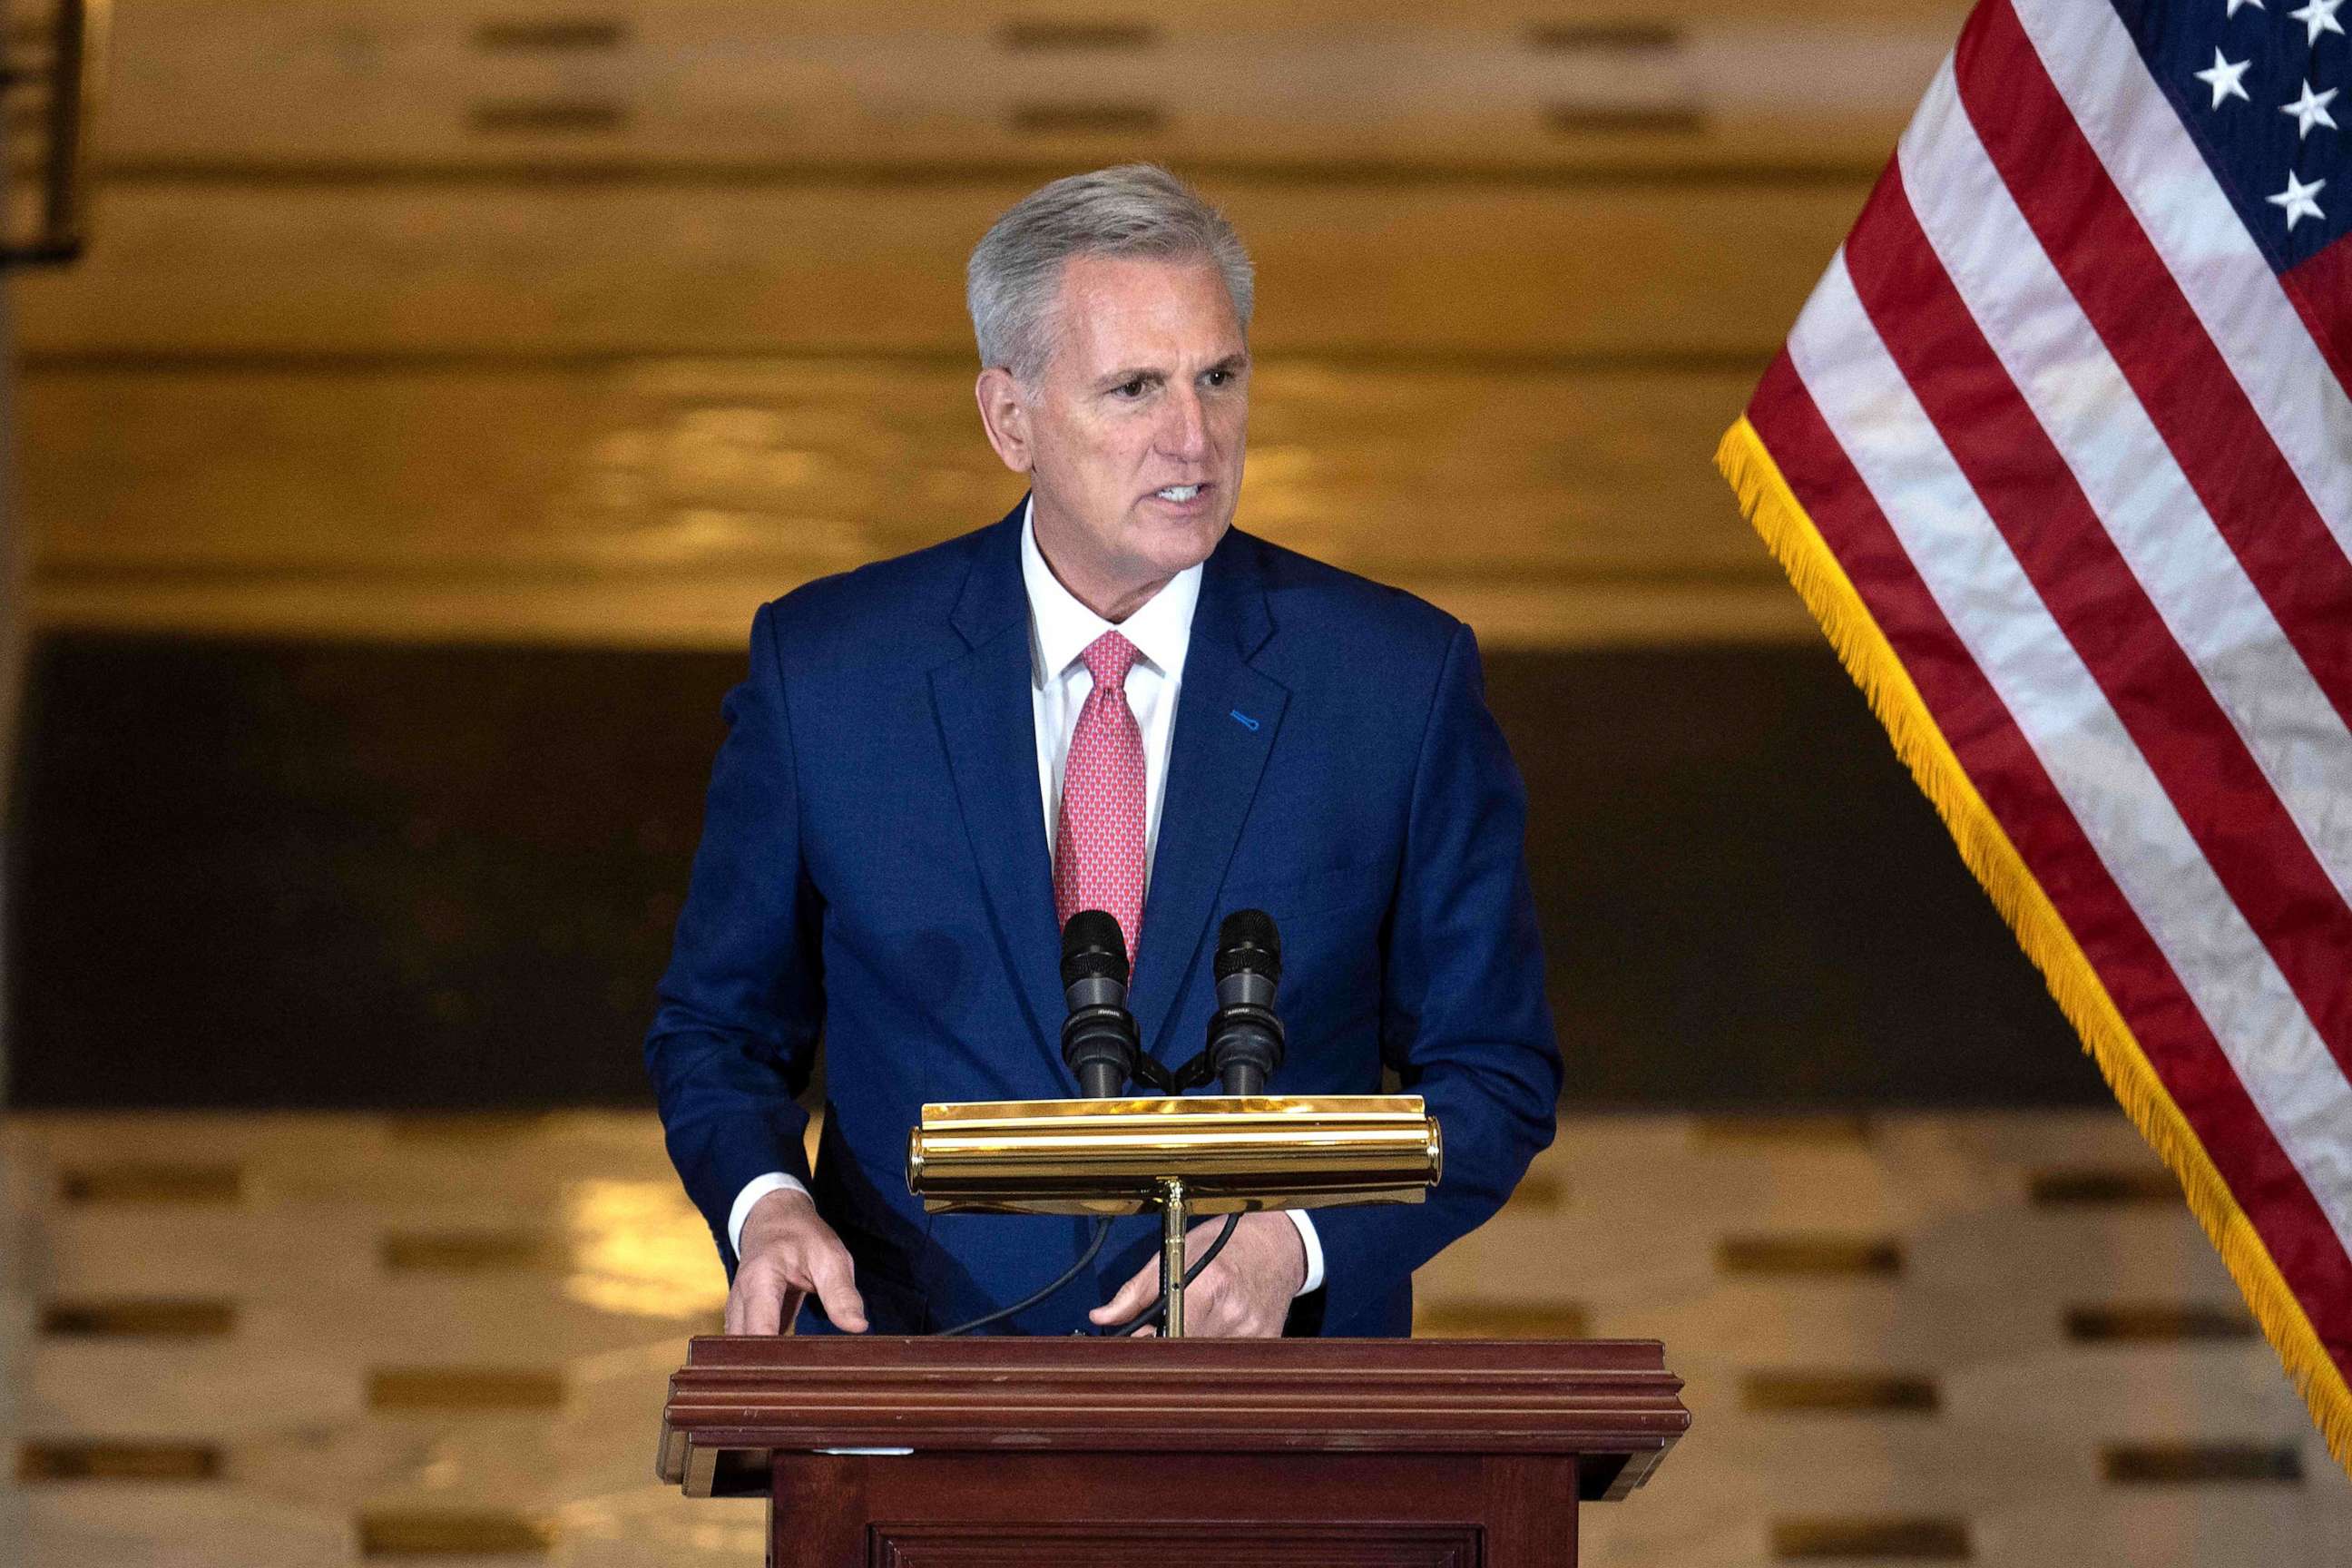 PHOTO: House Speaker Kevin McCarthy speaks during an event at the US Capitol in Washington, D.C., on June 7, 2023.